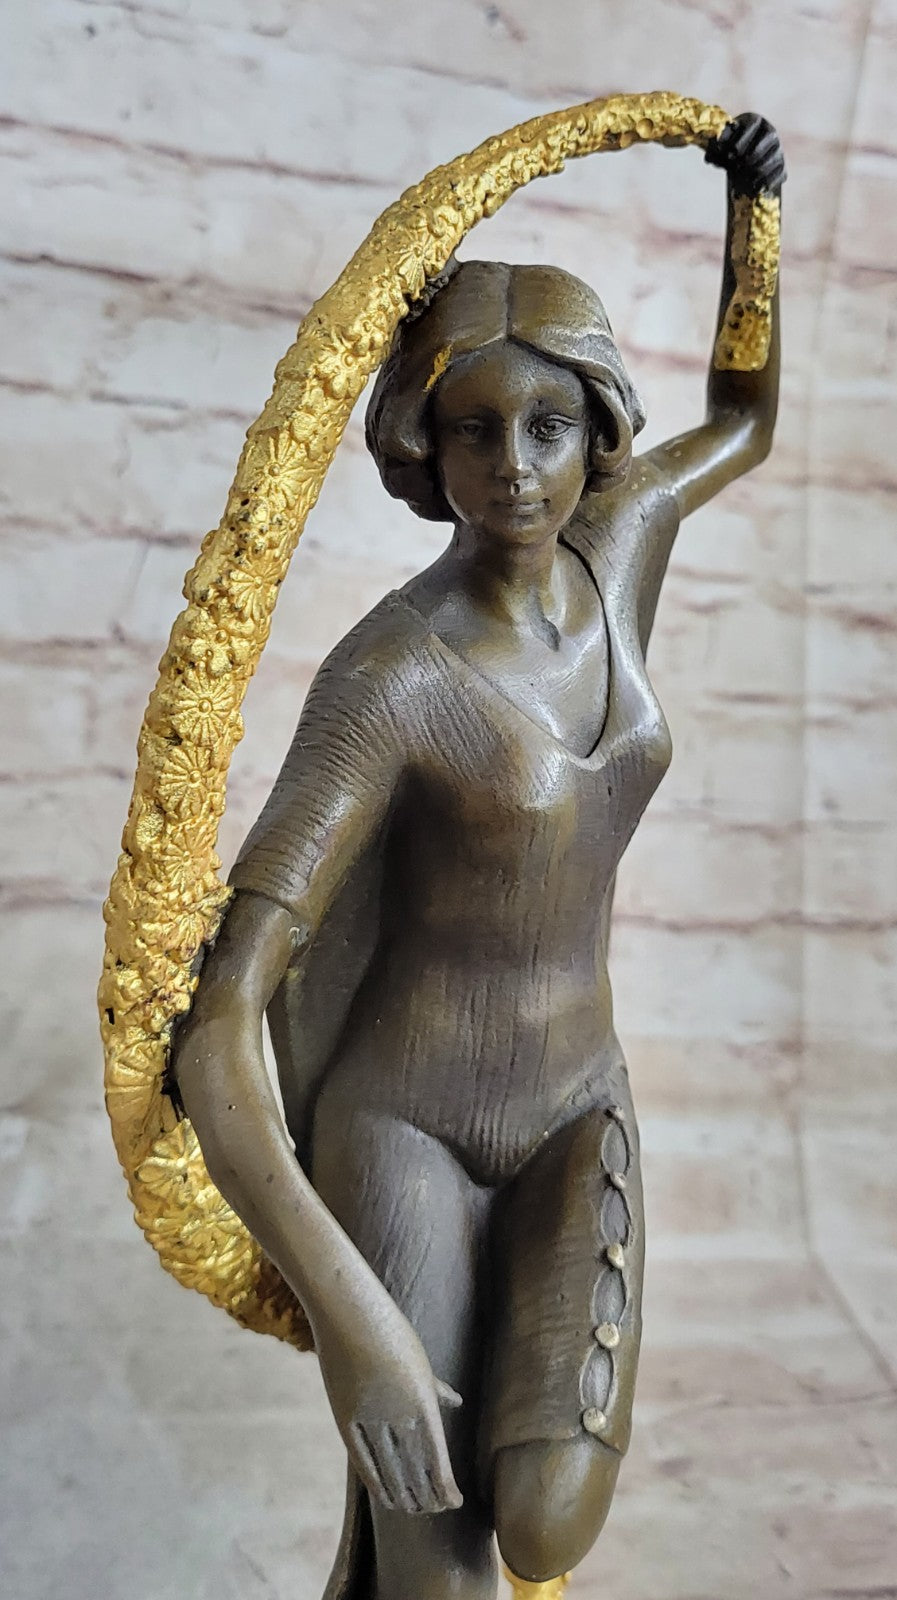 Museum Quality Classic Art Deco Lady 100% Real Bronze Sculpture Made by Lost Wax